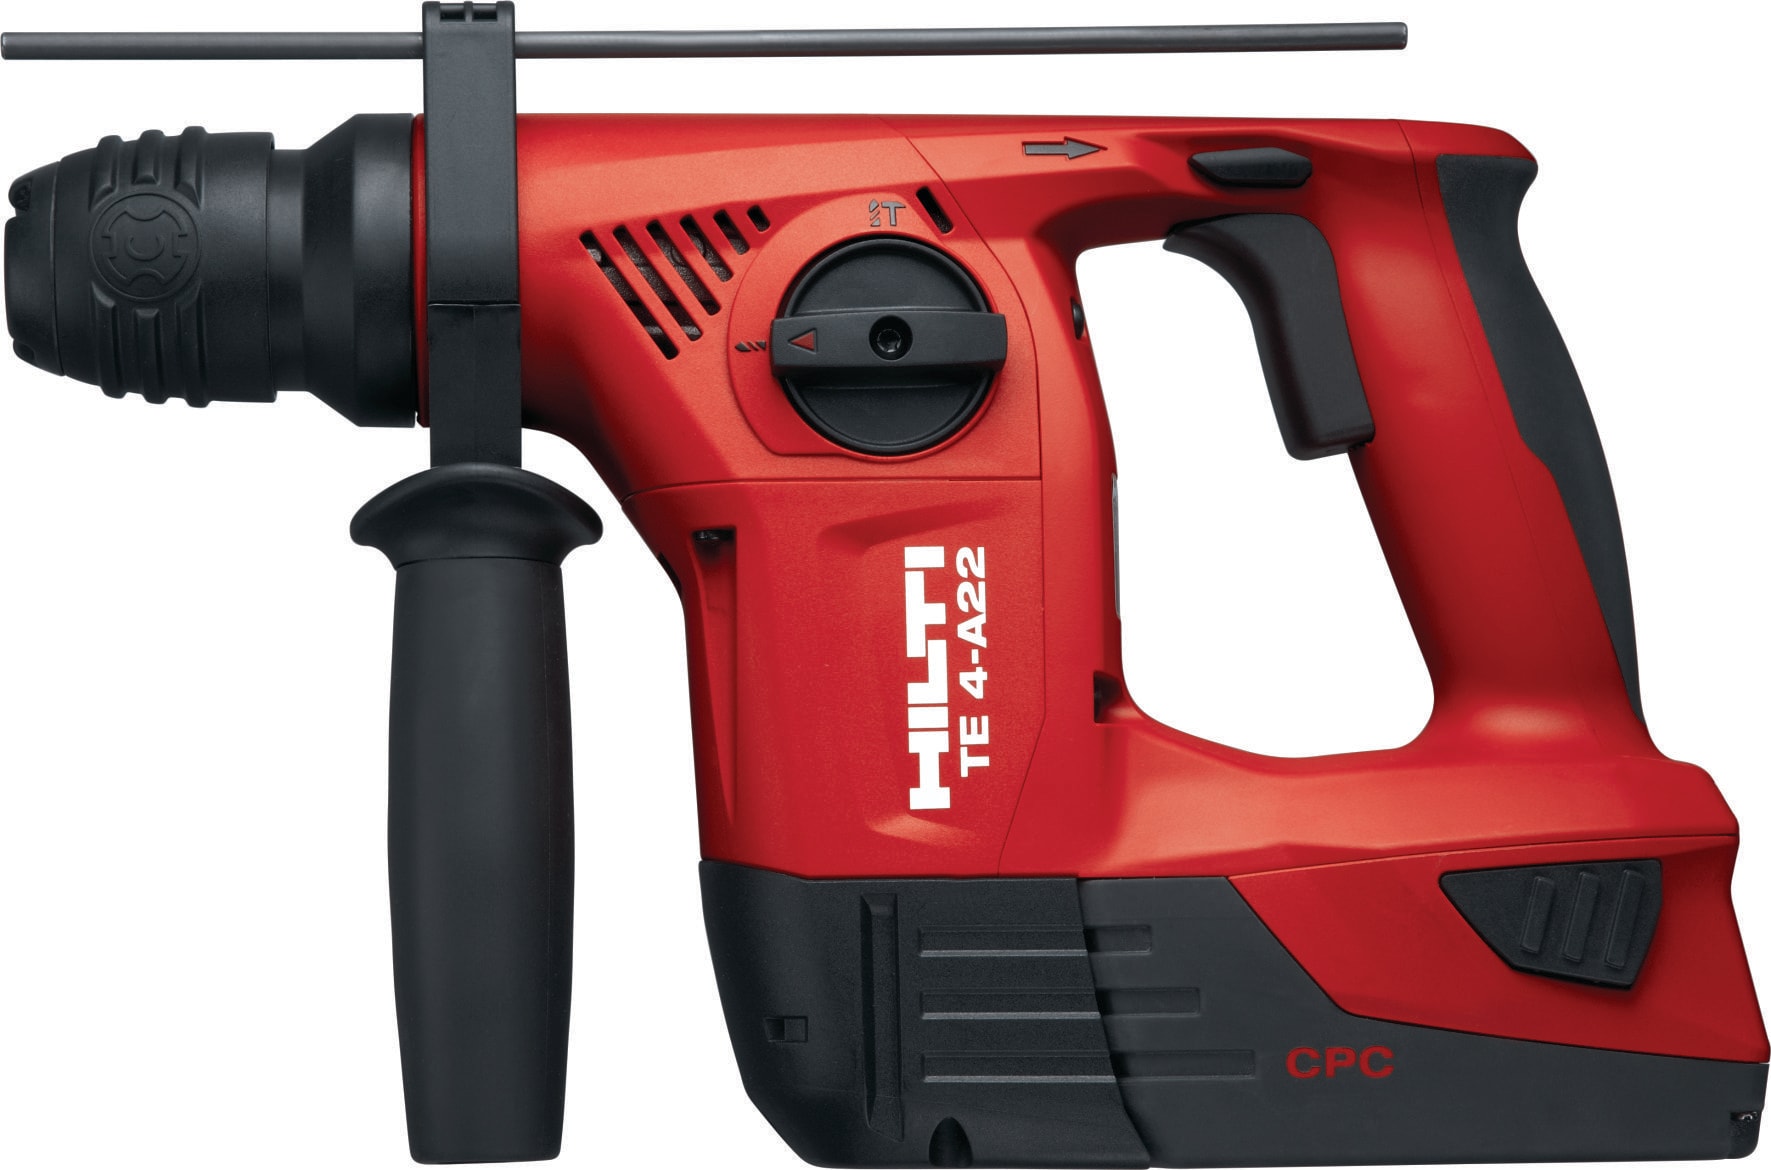 Hilti NEW HILTI AG 125-A22 CORDLESS HAMMER DRILL IMPACT BOX ONLY WITH MANUAL! 